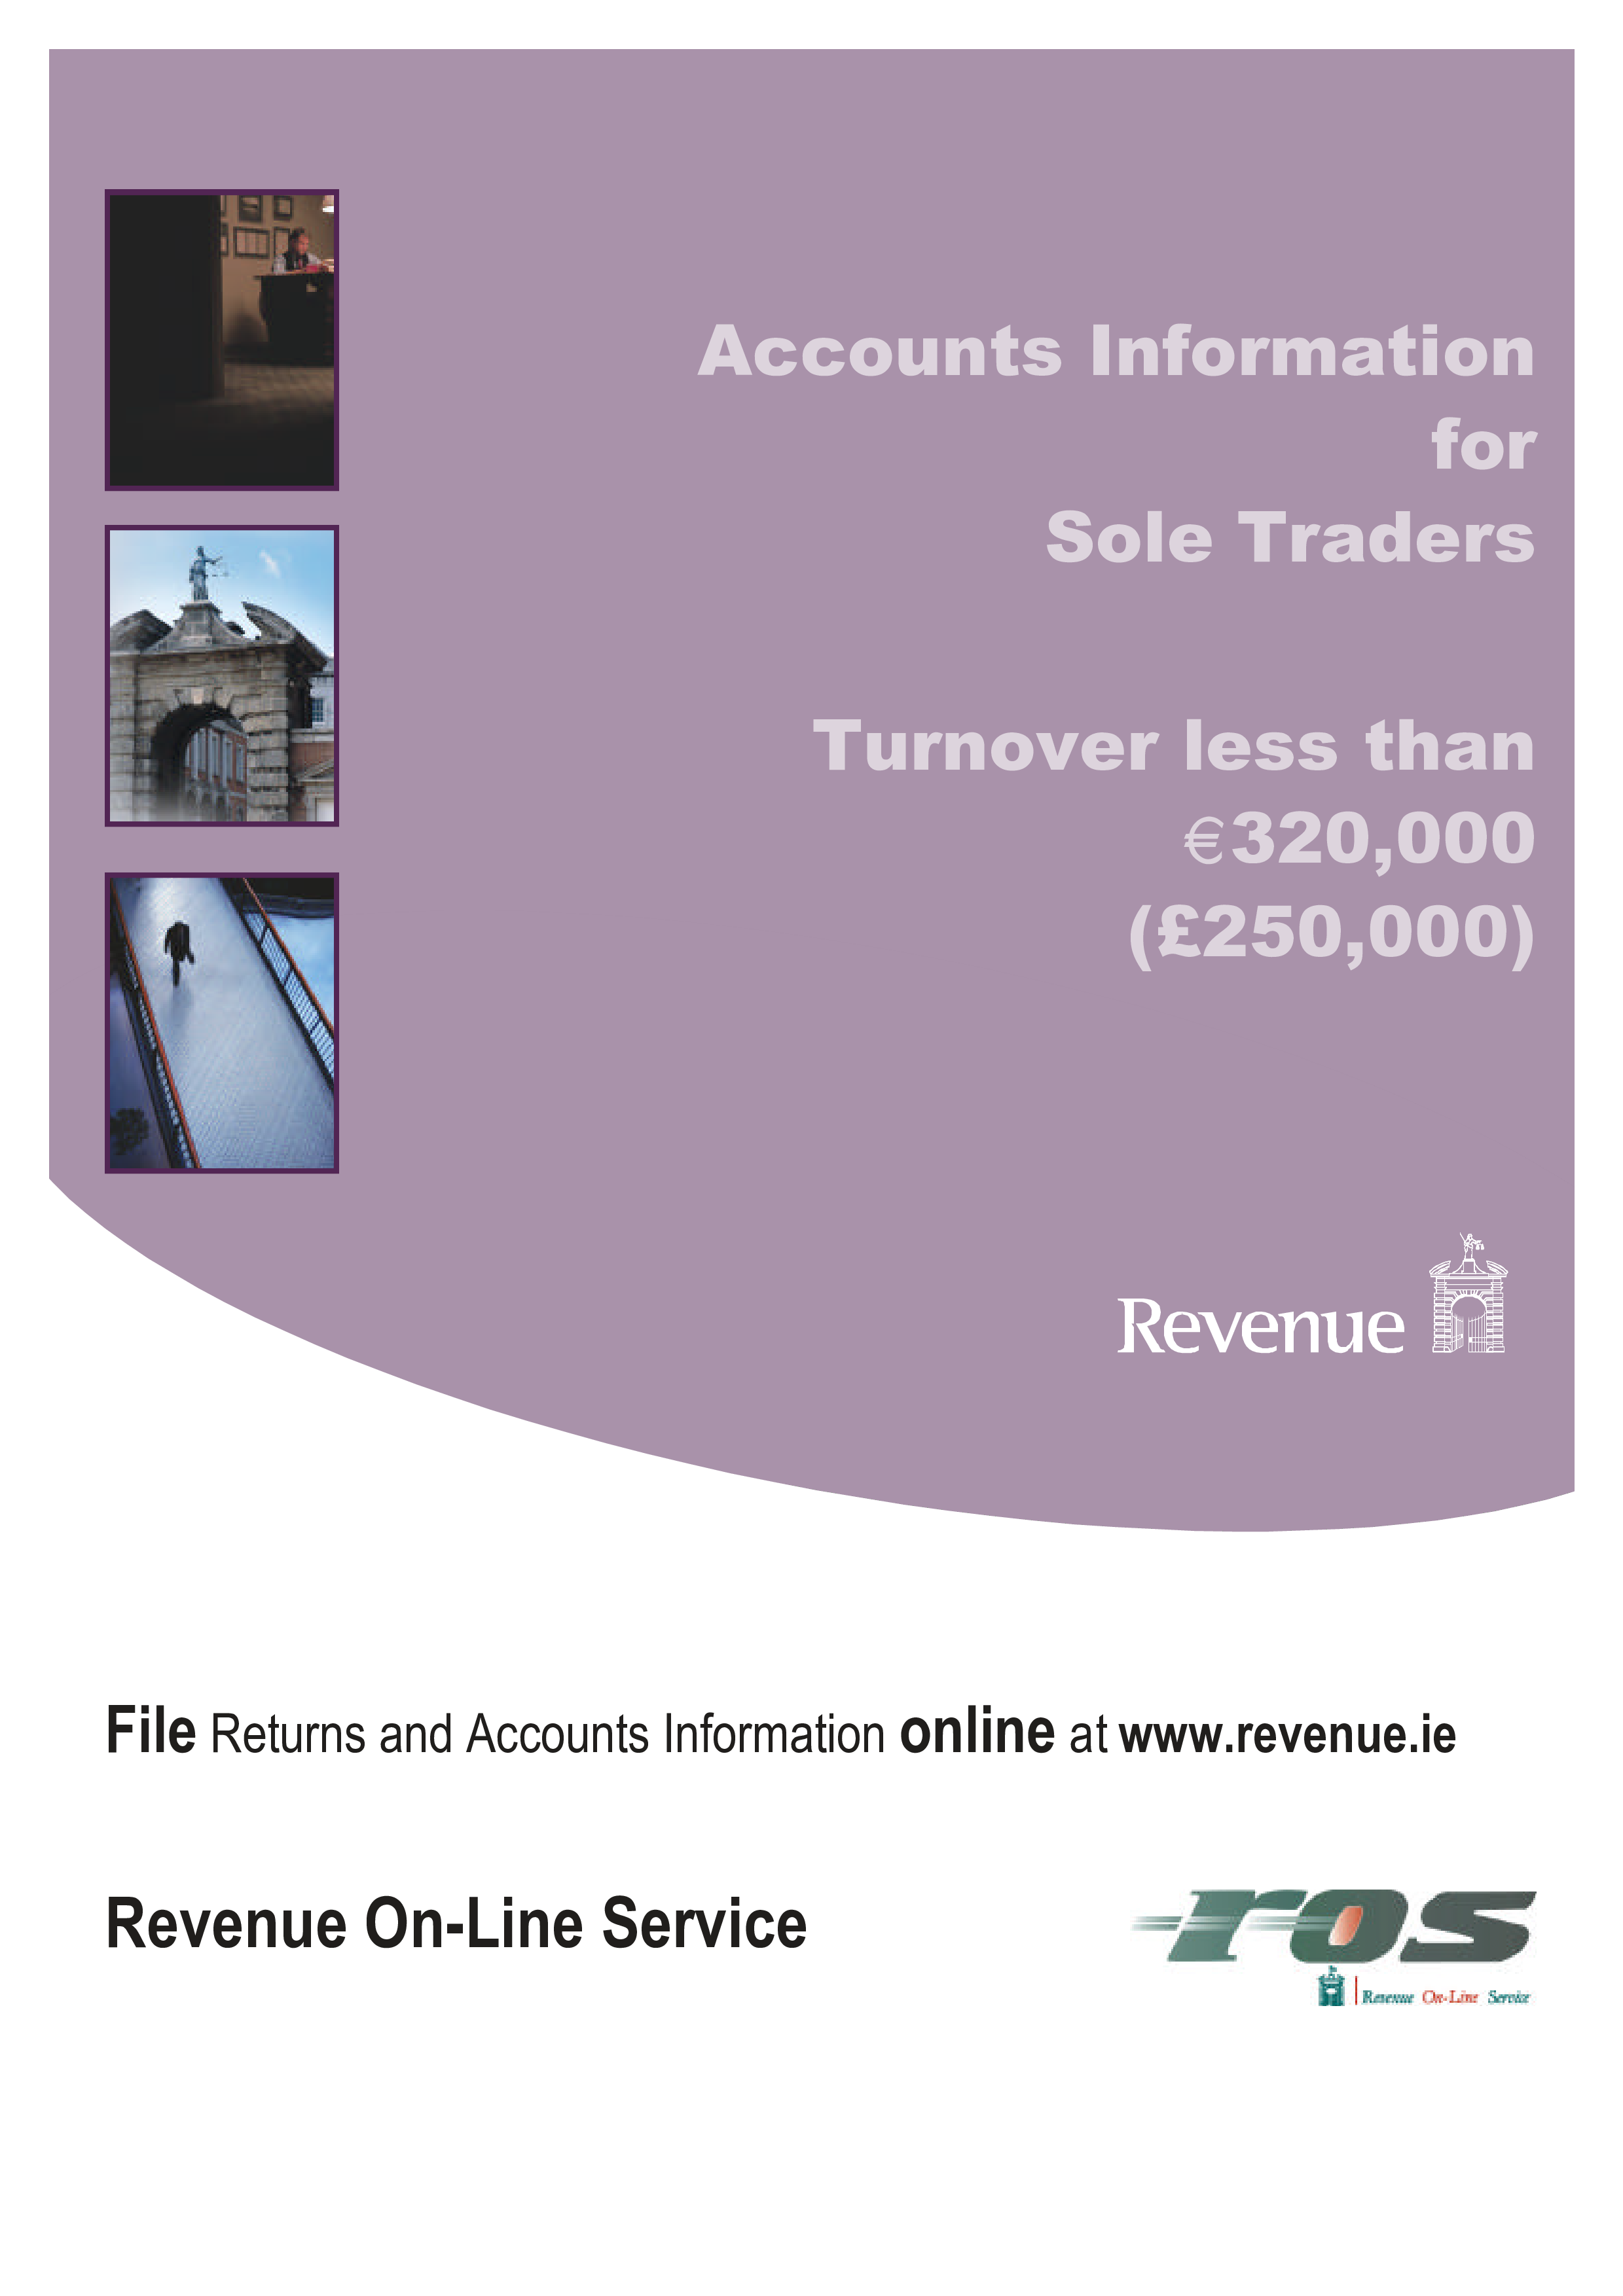 stam 1 - accounts information for sole traders turnover less than £320,000 (£250,000) voorbeeld afbeelding 